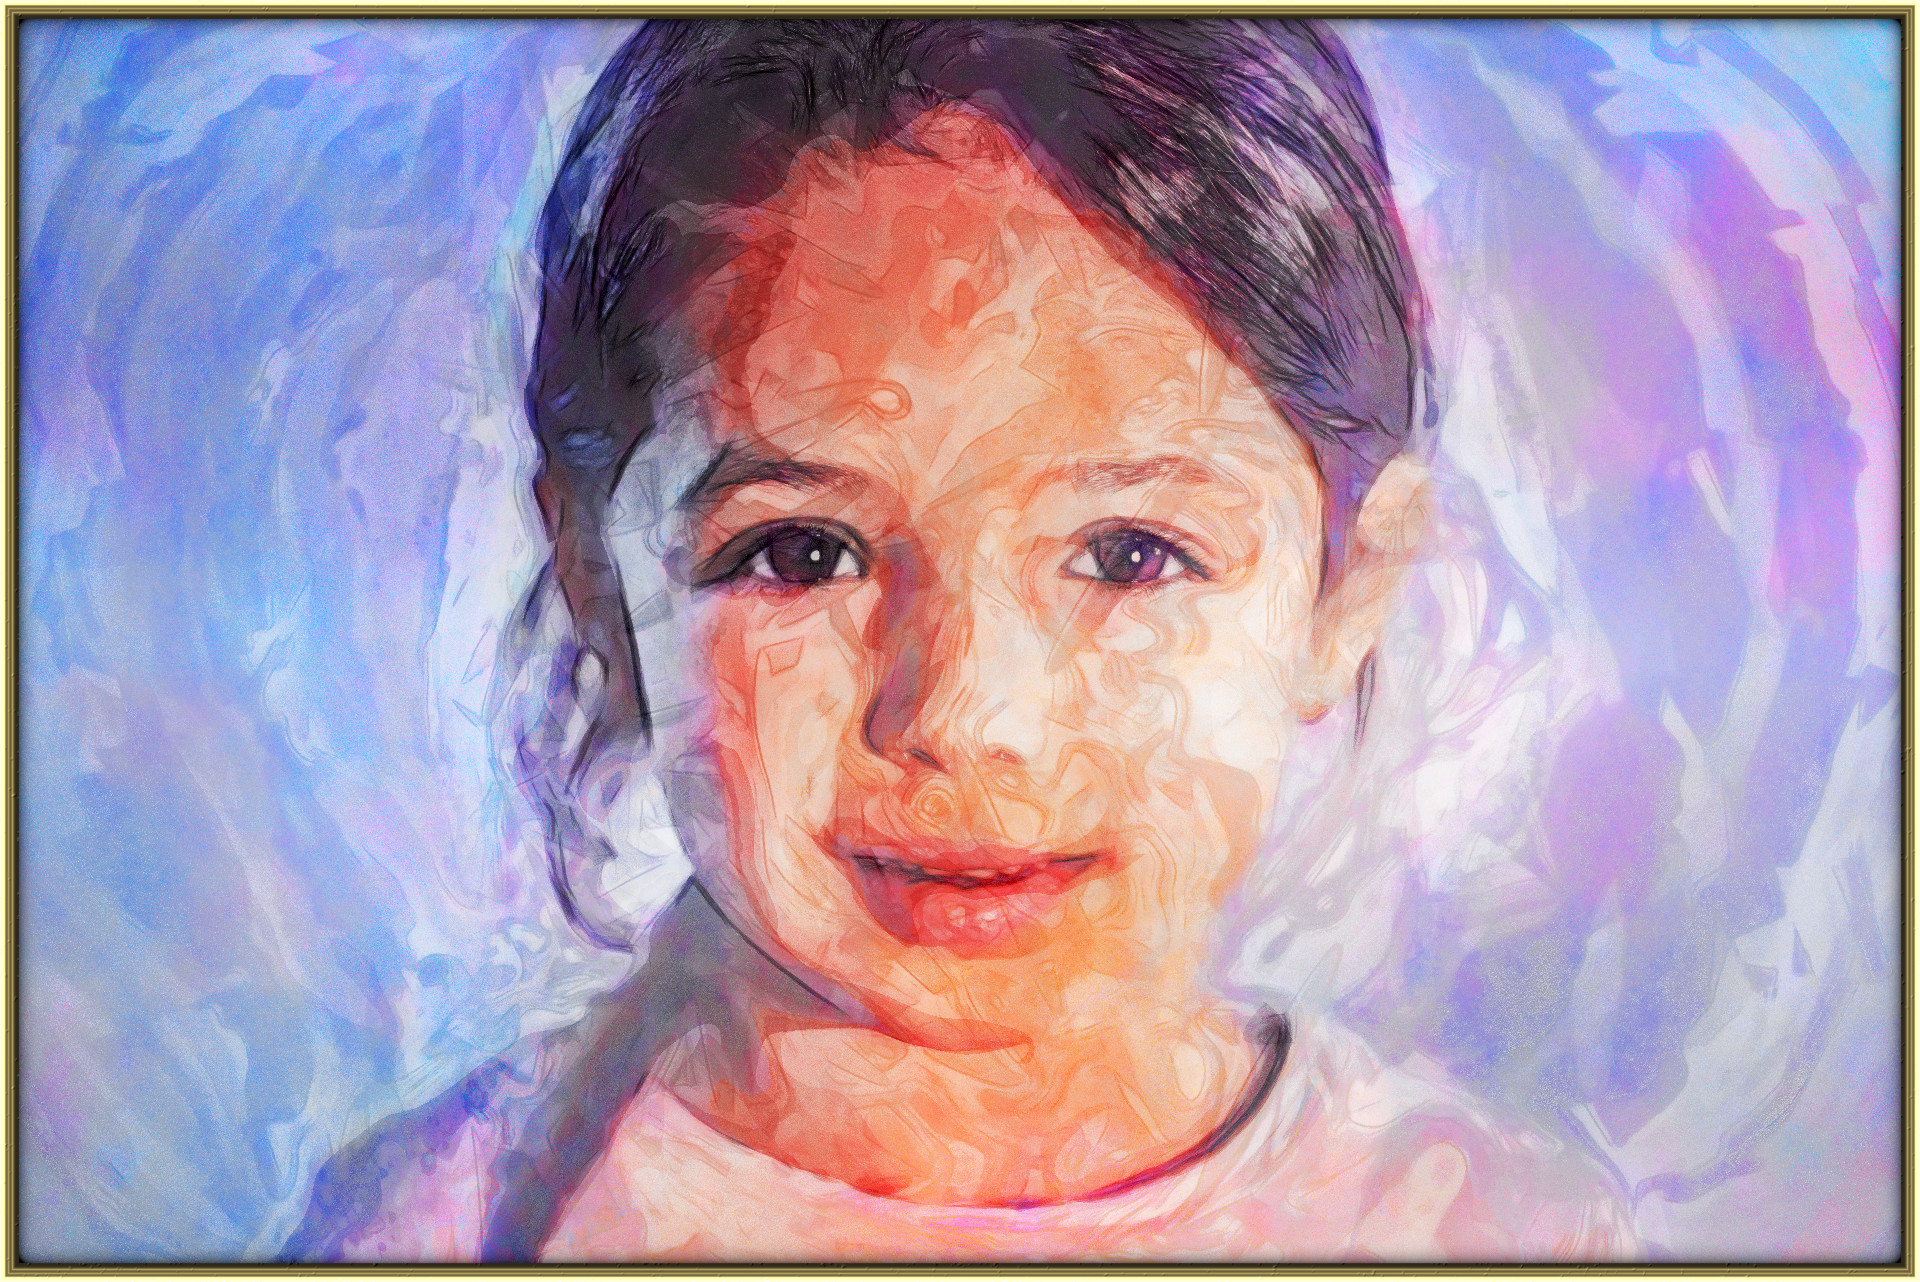 2024-01-15 17-56-39 girl-1871104_1920 with a WaterSketch Effect 2024 (100.0,16.0,100.0,0.0,1,0.0,-1.0,7-1.0,4,0).jpg